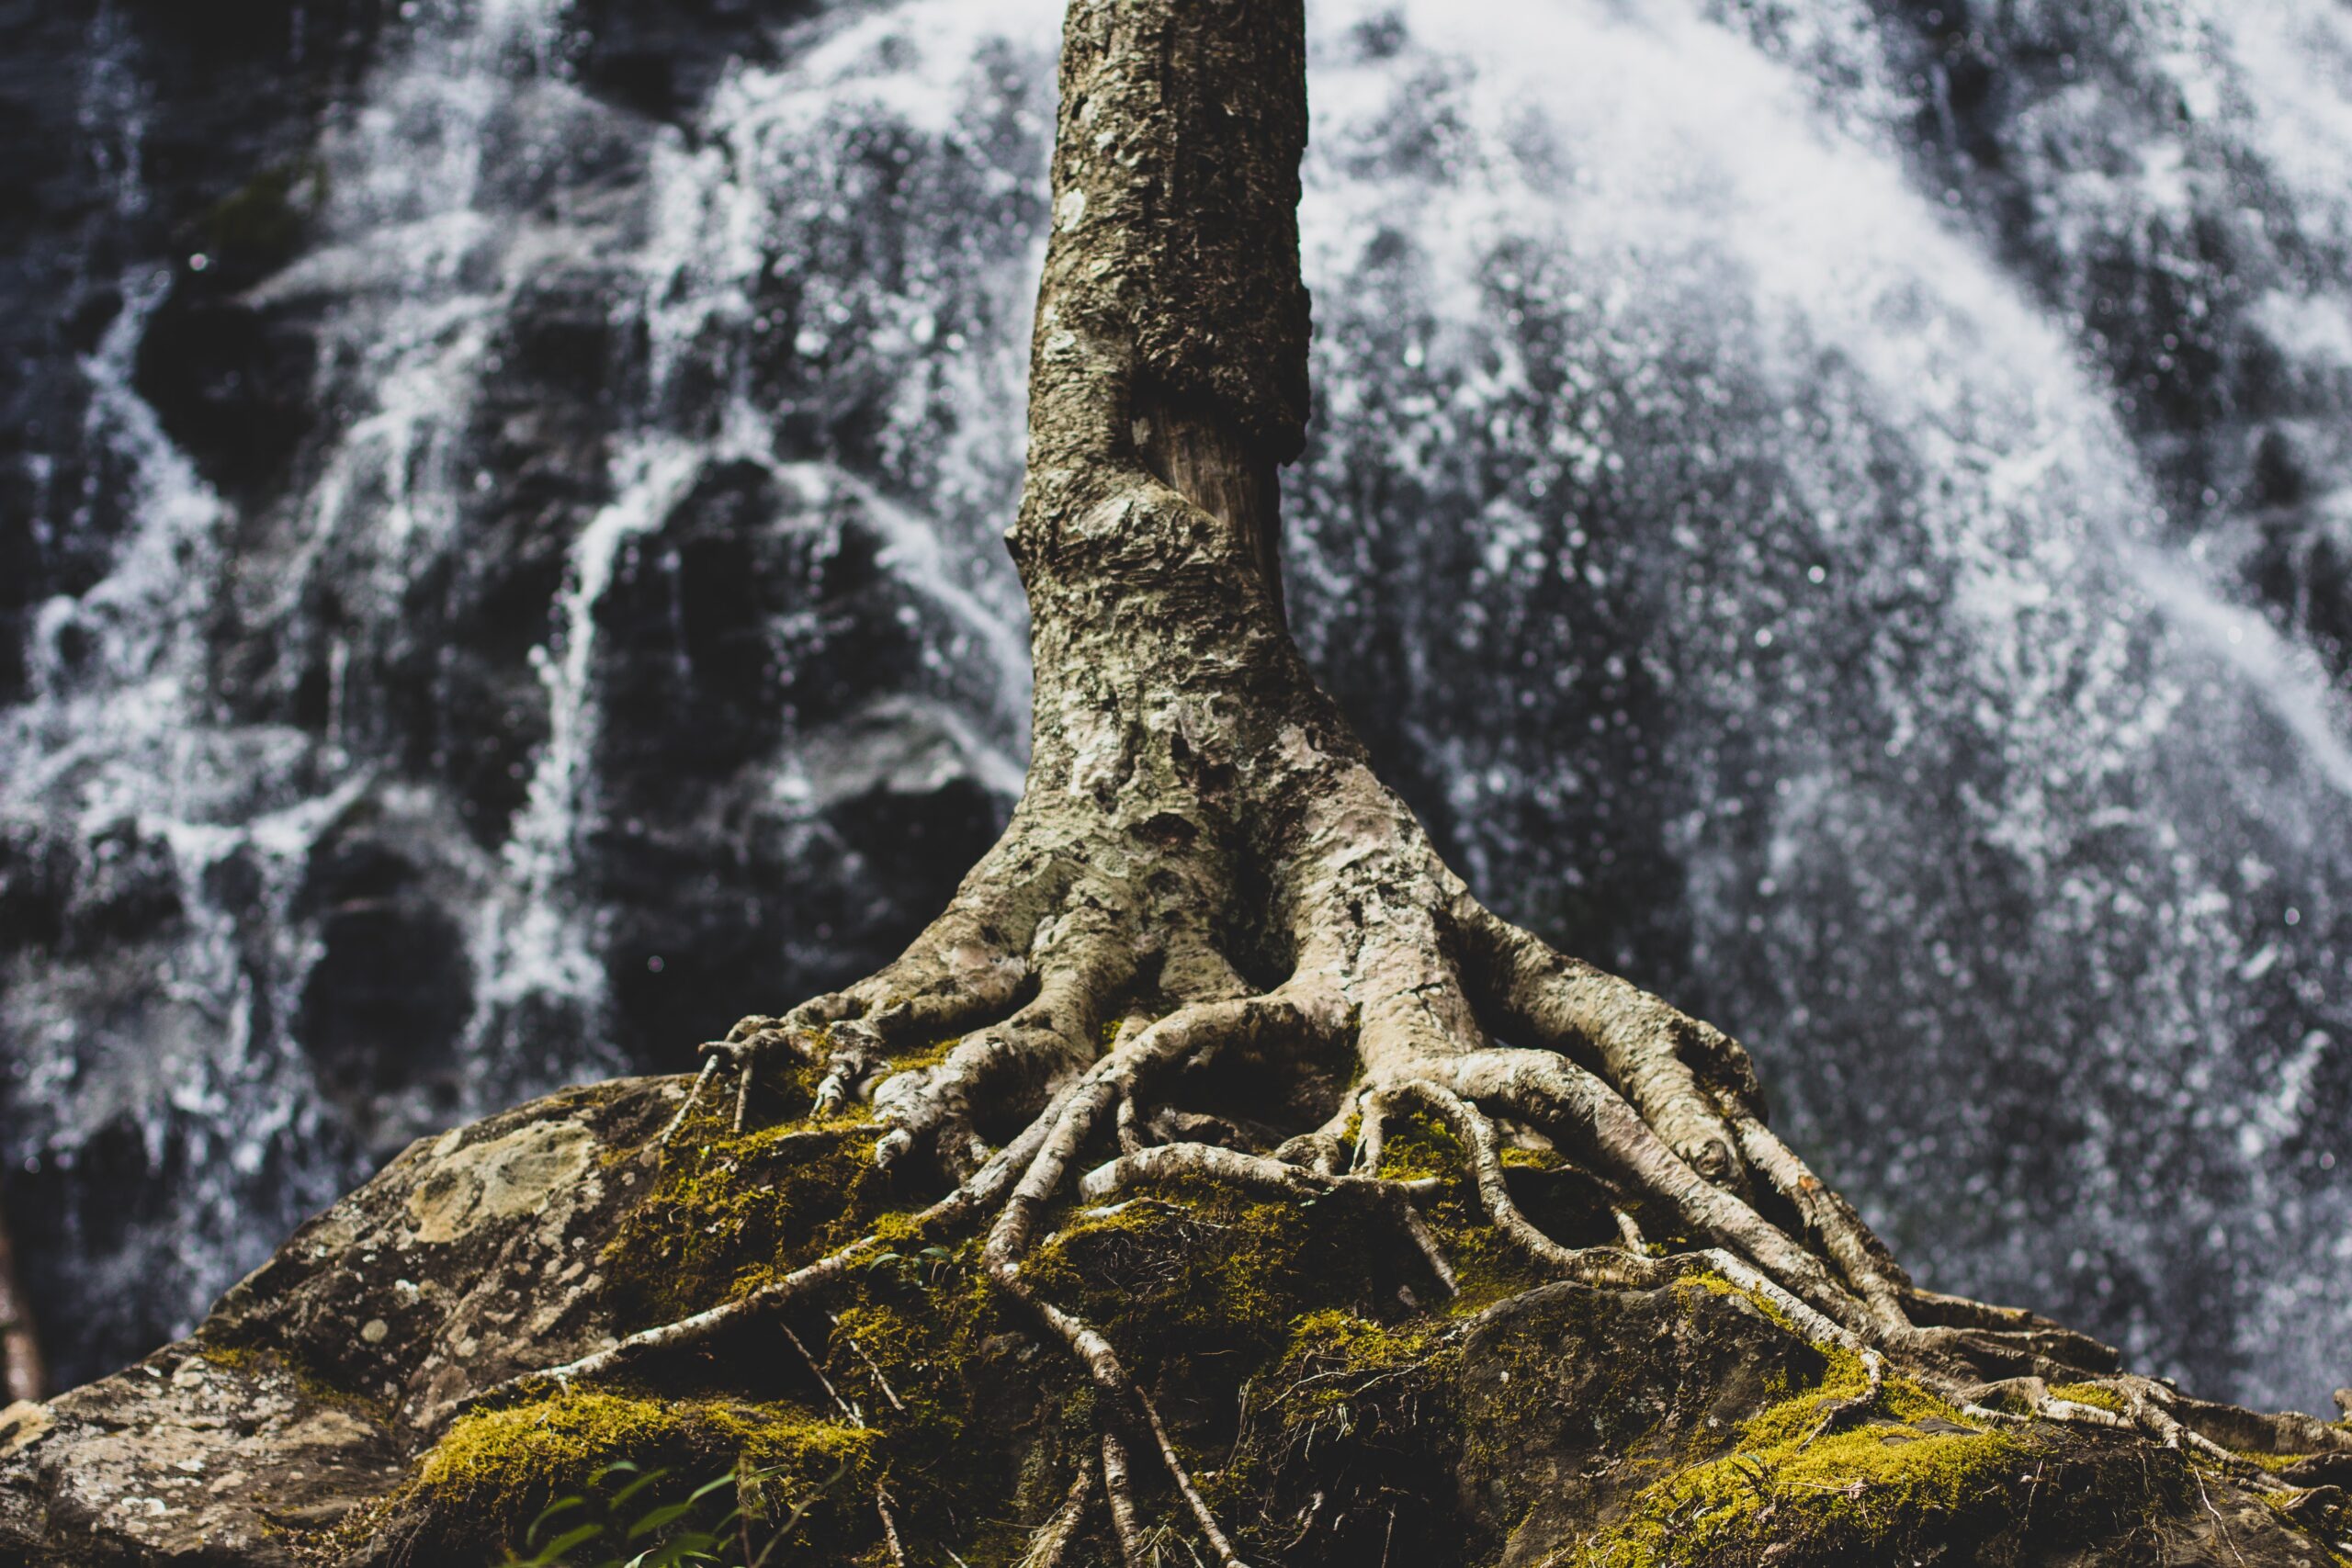 The exposed roots of an old tree, with moss growing around it on rocky terrain.